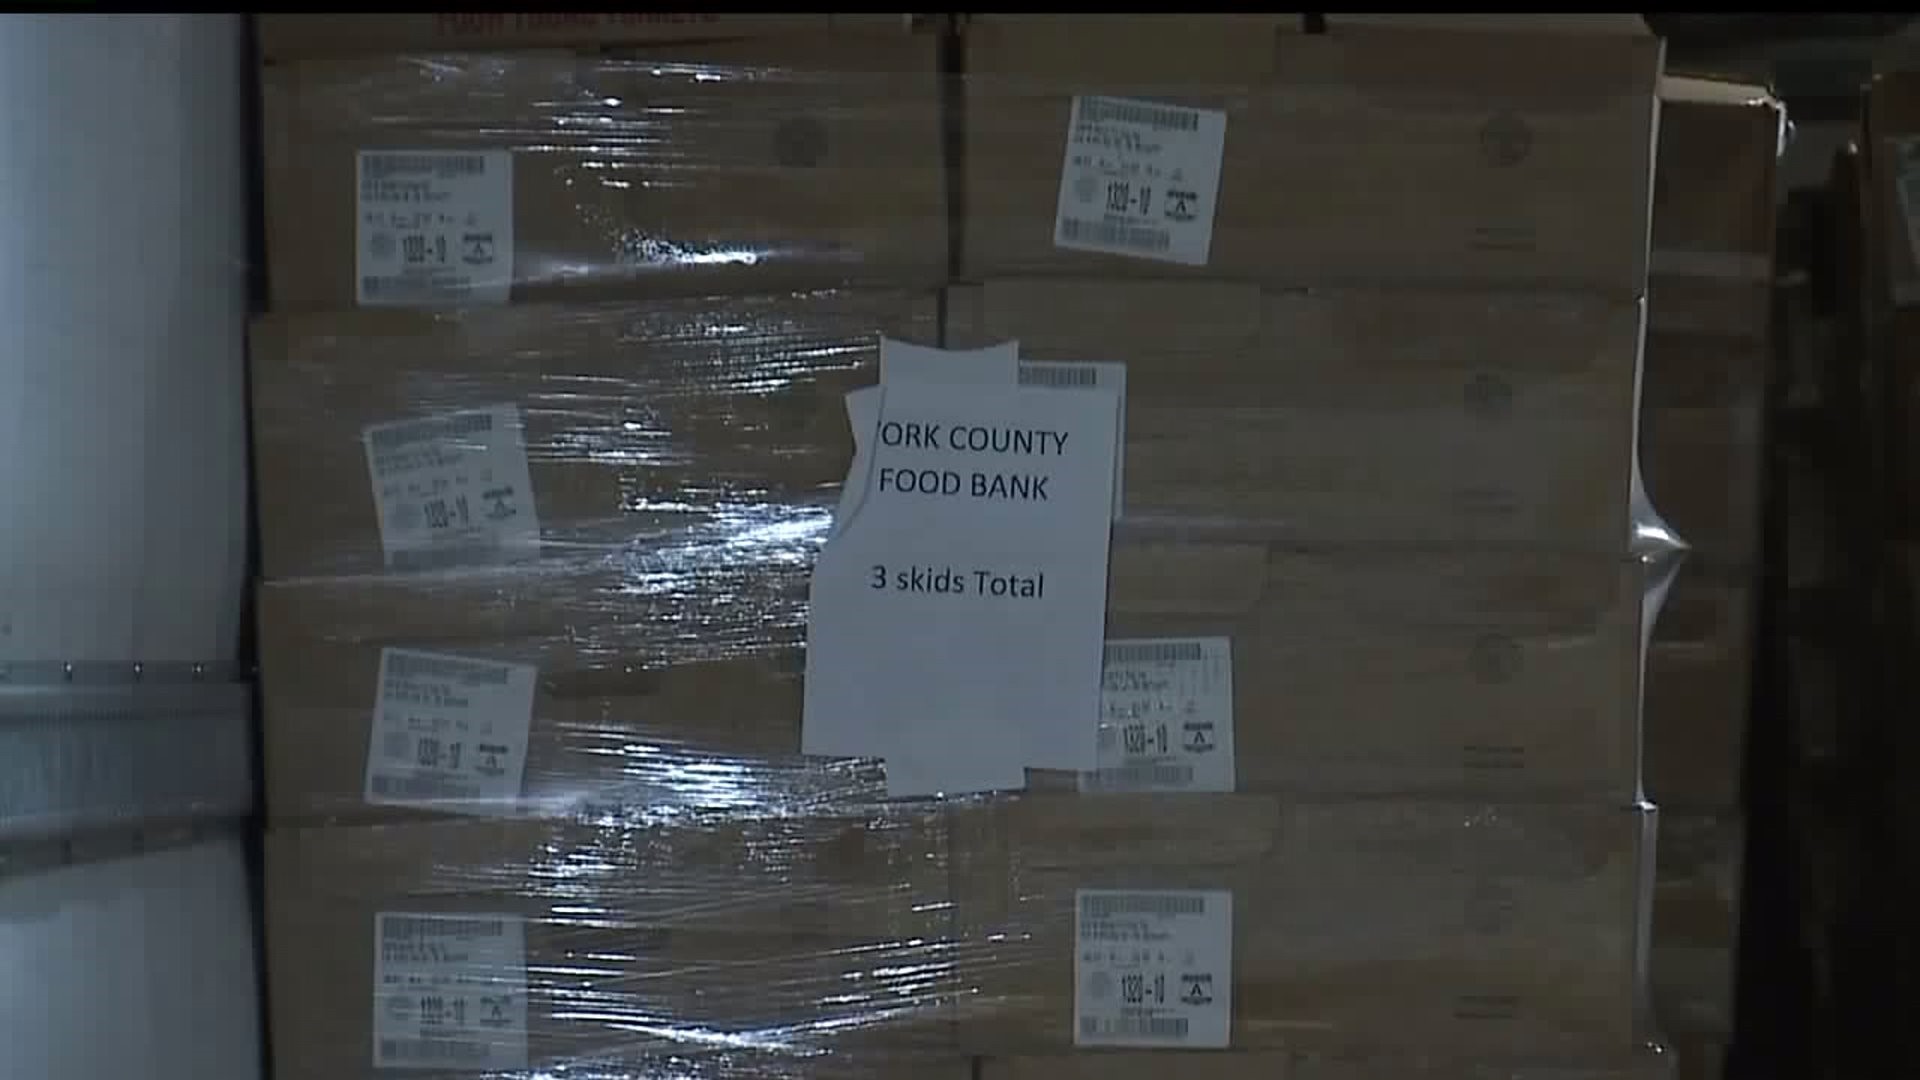 York Food Bank receiving Turkey Donation from Giant Food Stores